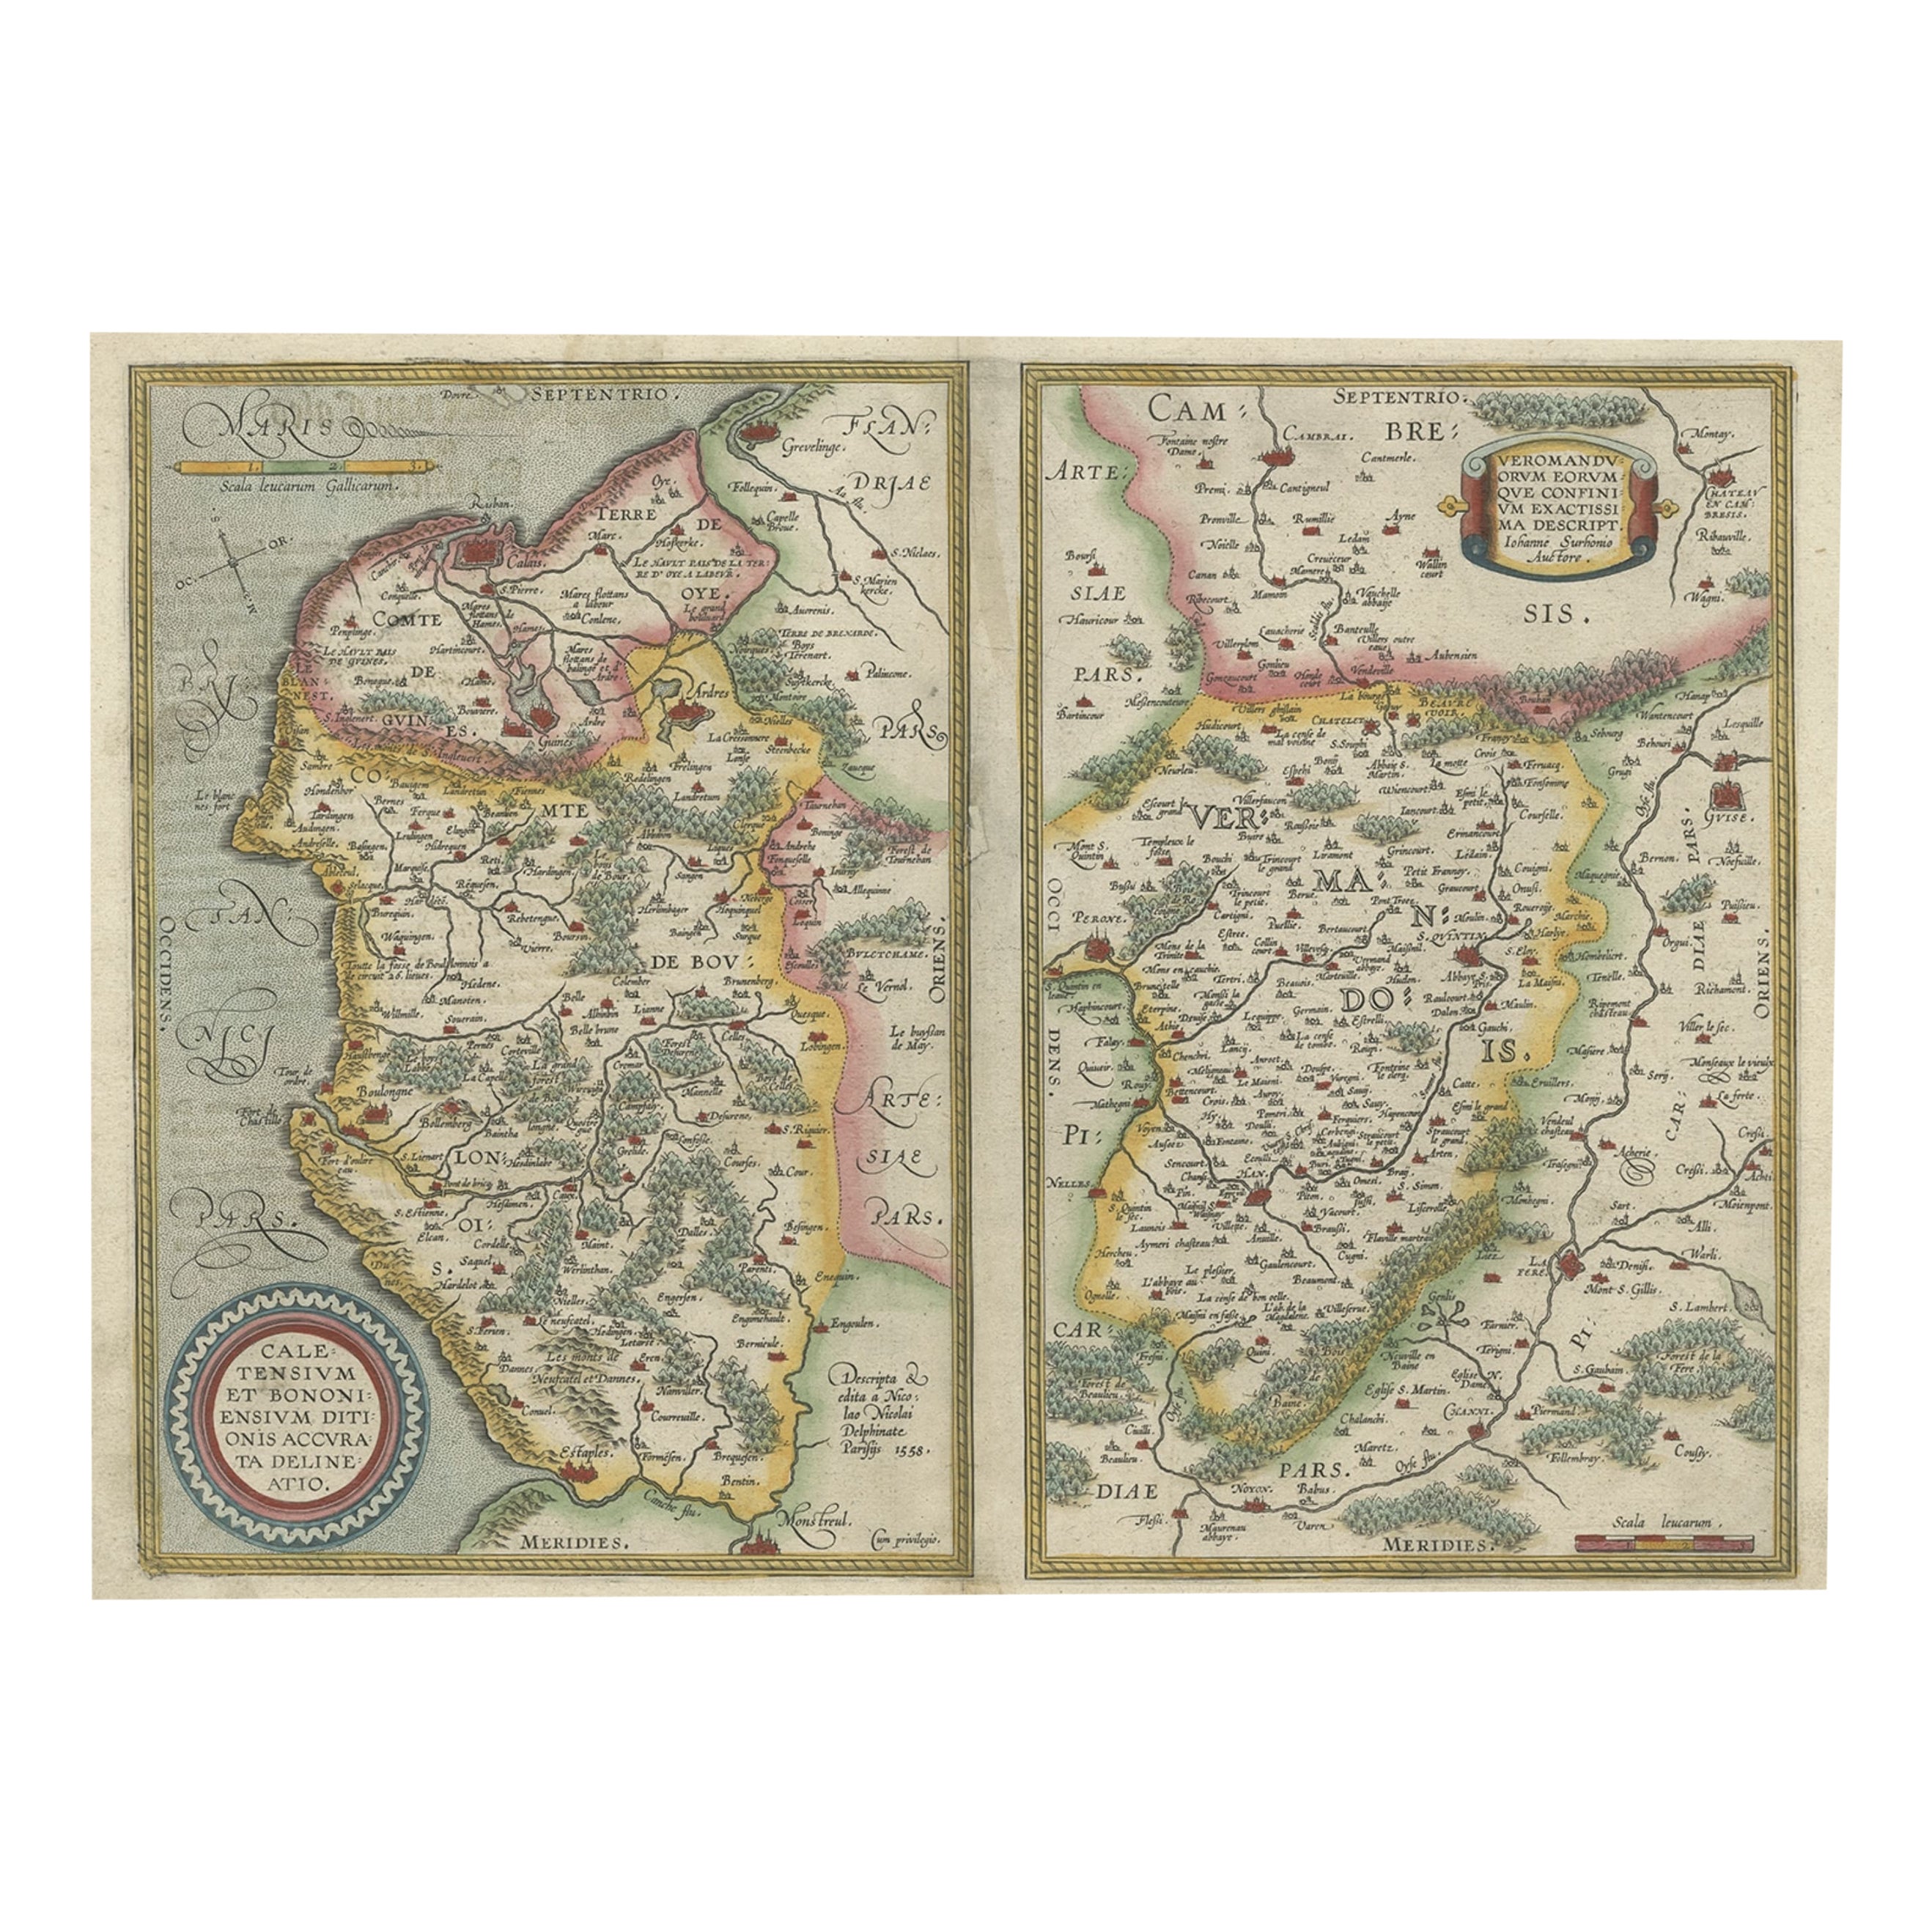 Antique Map of the Region of Boulogne and Peronne, France 'C.1590' For Sale